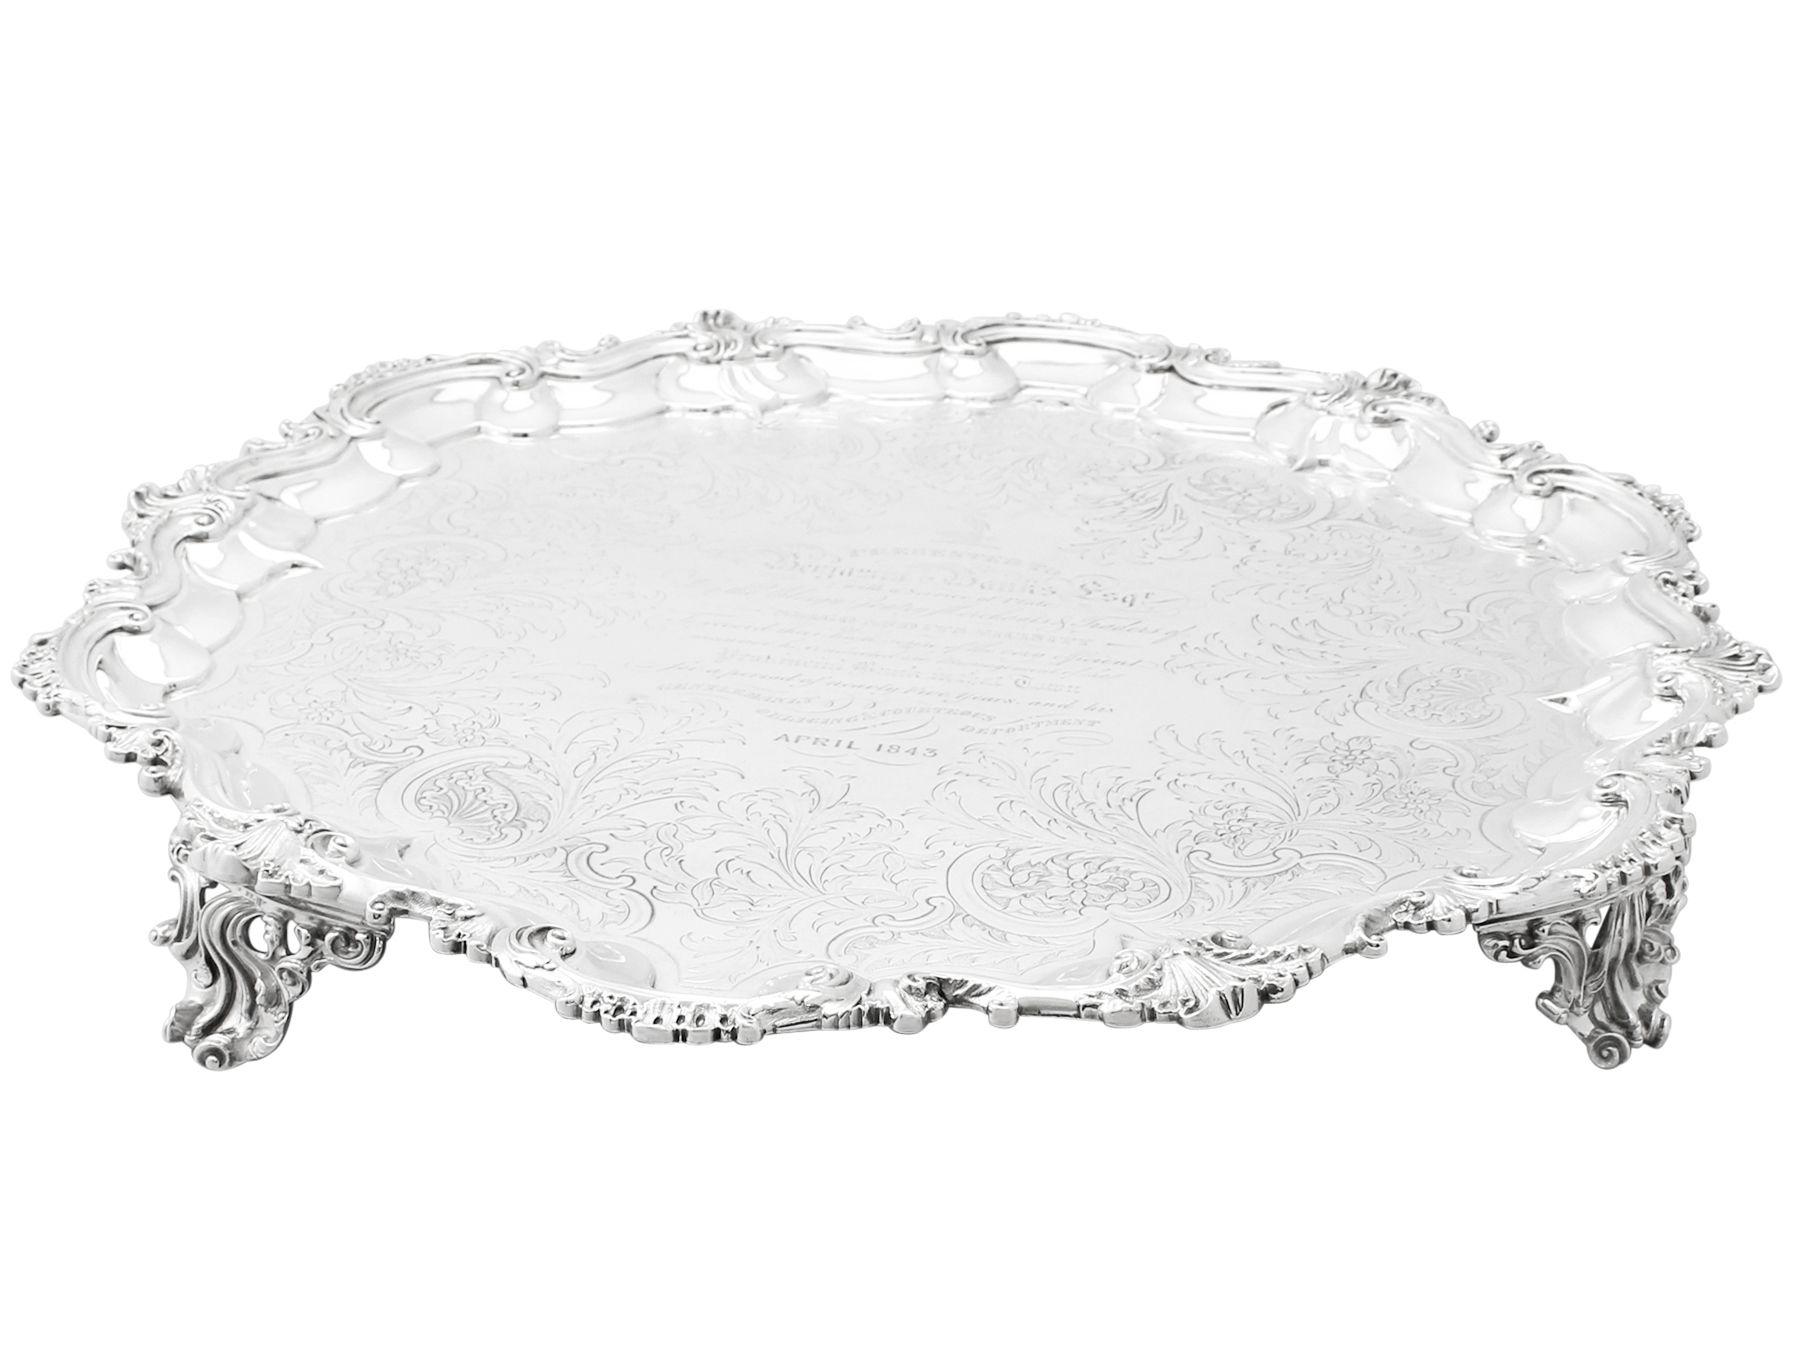 A magnificent, fine, large and impressive antique early Victorian English sterling silver salver by William Ker Reid; part of our antique salver collection.

This magnificent antique Victorian sterling silver salver has a circular shaped form onto